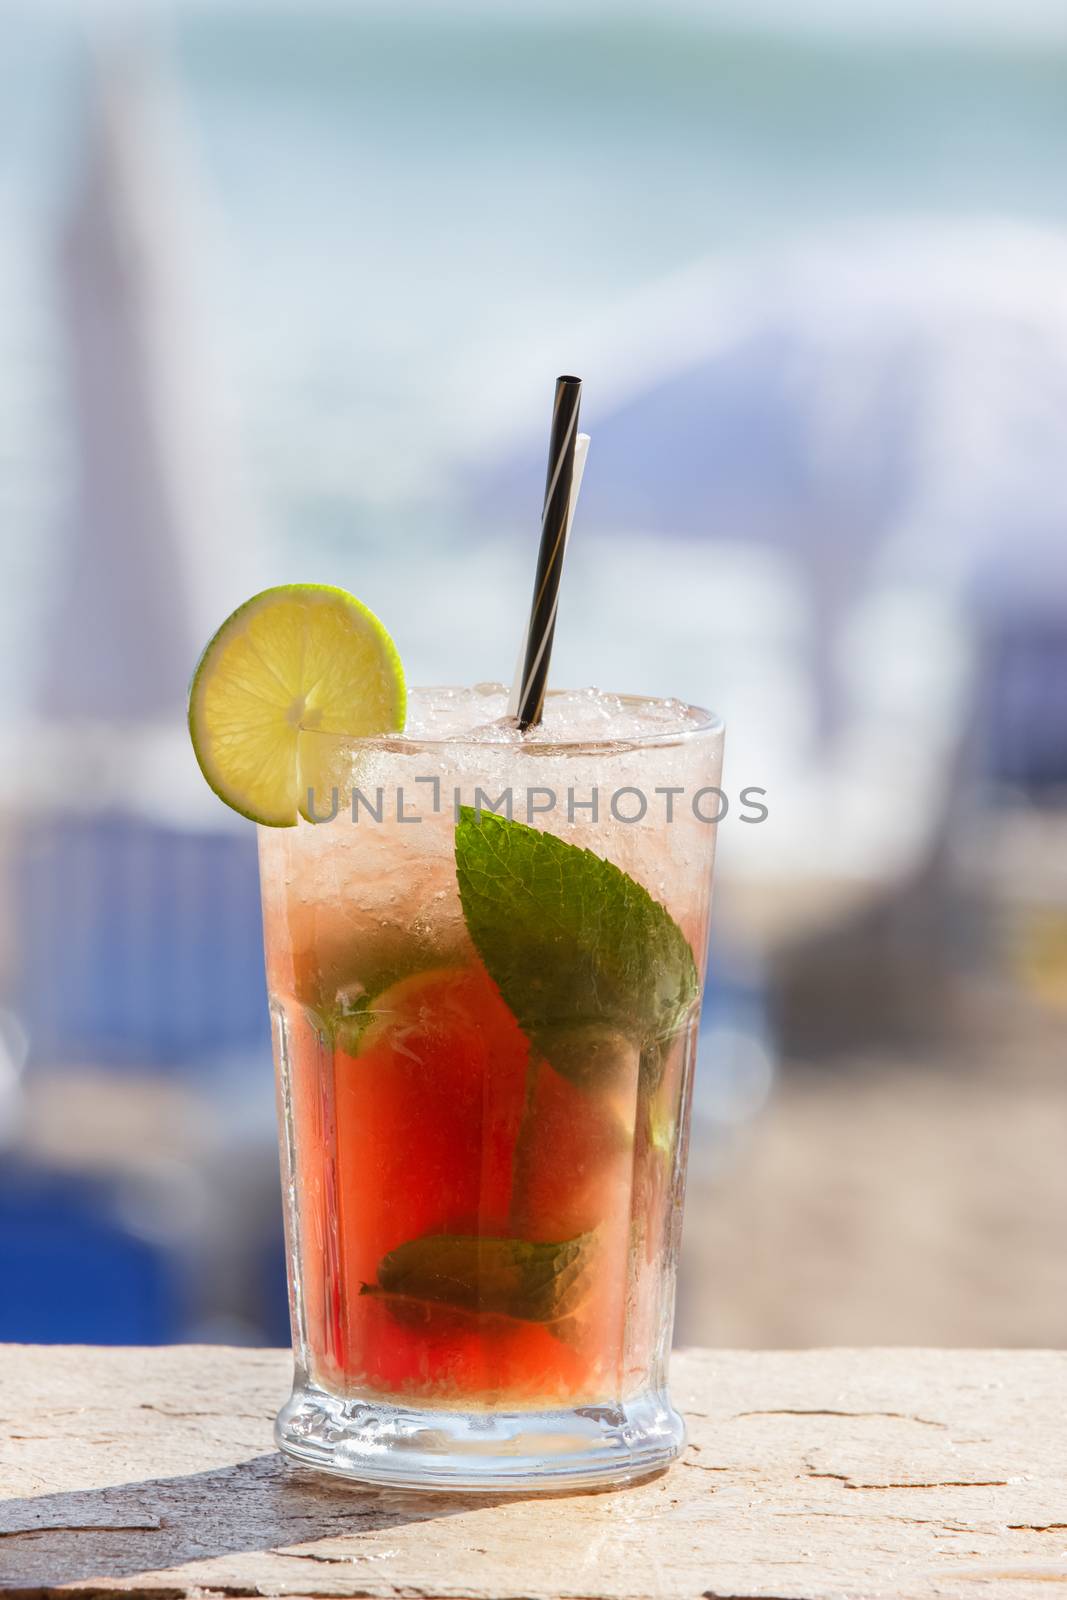 Strawberry cocktail on a beach. Outdoor settings